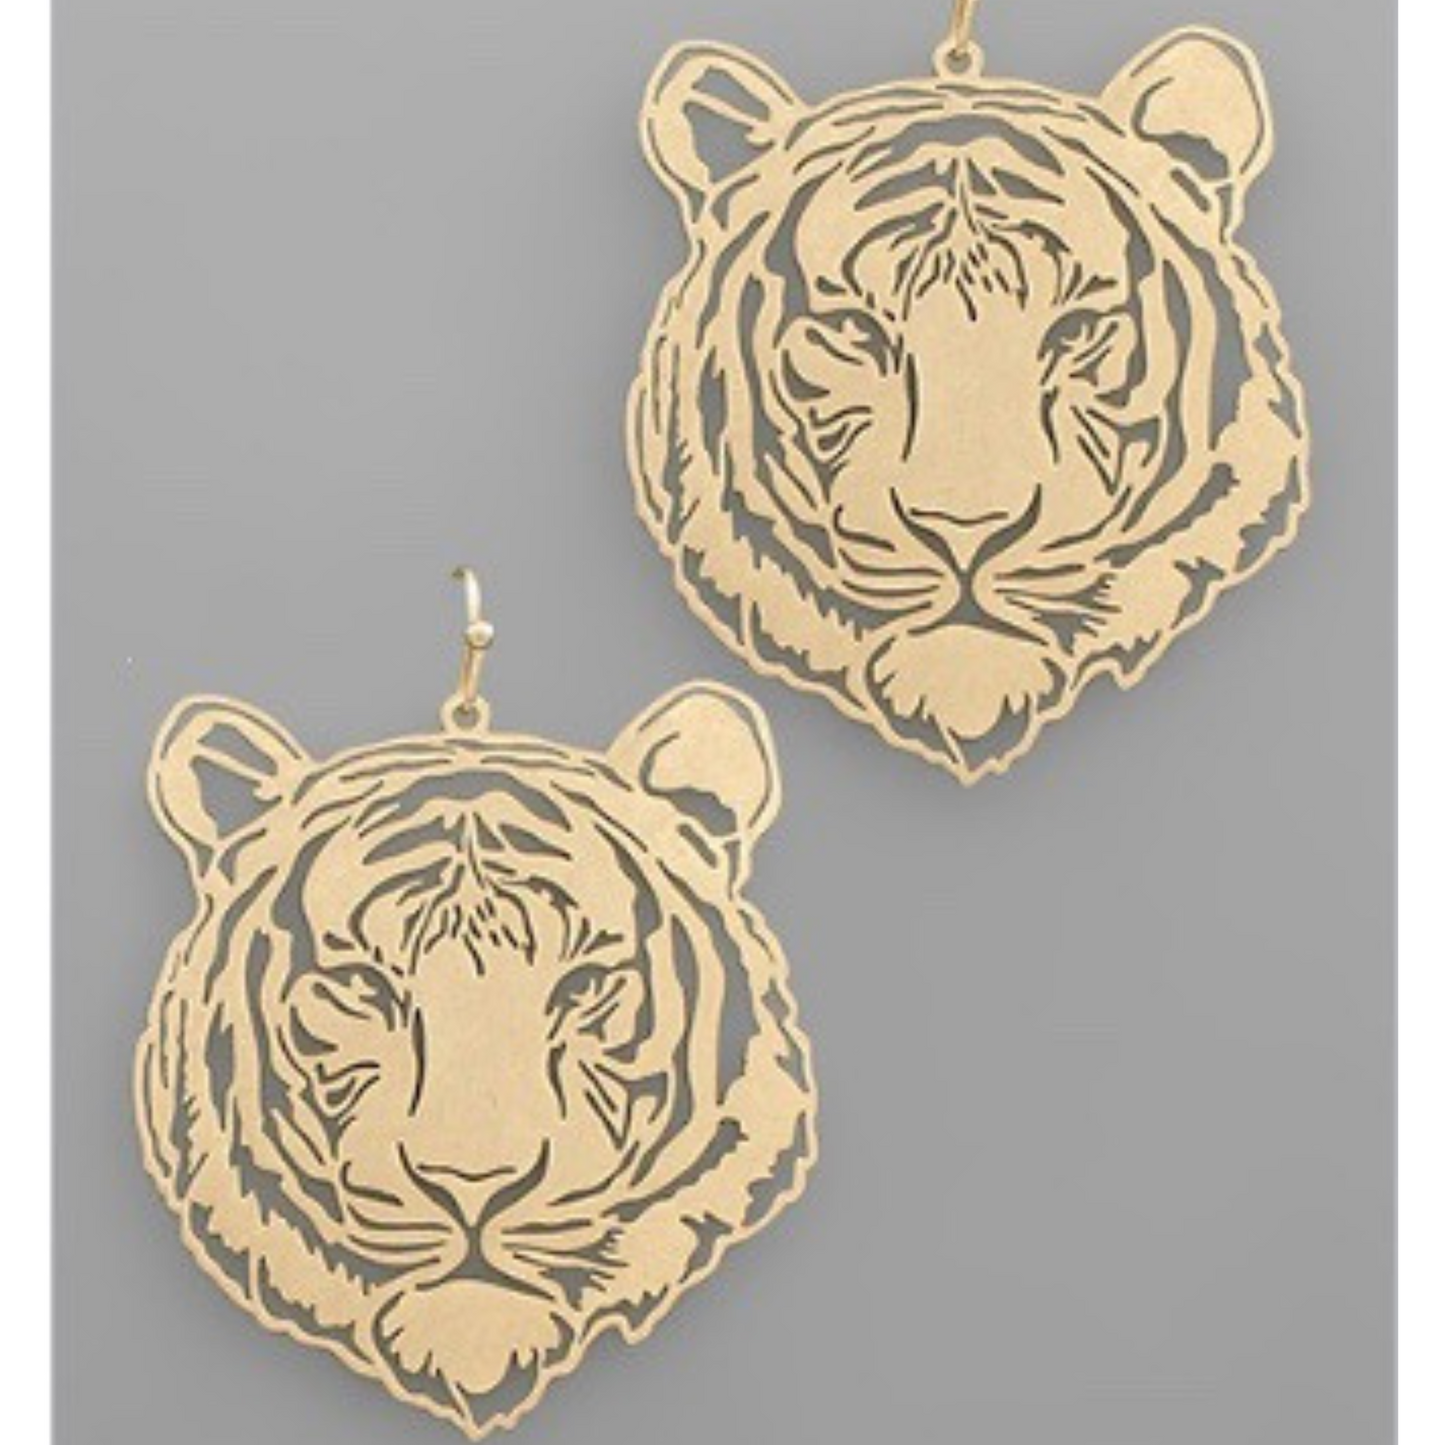 These Tiger Filigree Earrings boast an elegant worn gold finish, featuring intricate filigree detailing. Crafted in a stylish tiger shape, these dangle earrings are the perfect accessory for any fashionable outfit. Add a touch of sophistication and wild flair to your look.